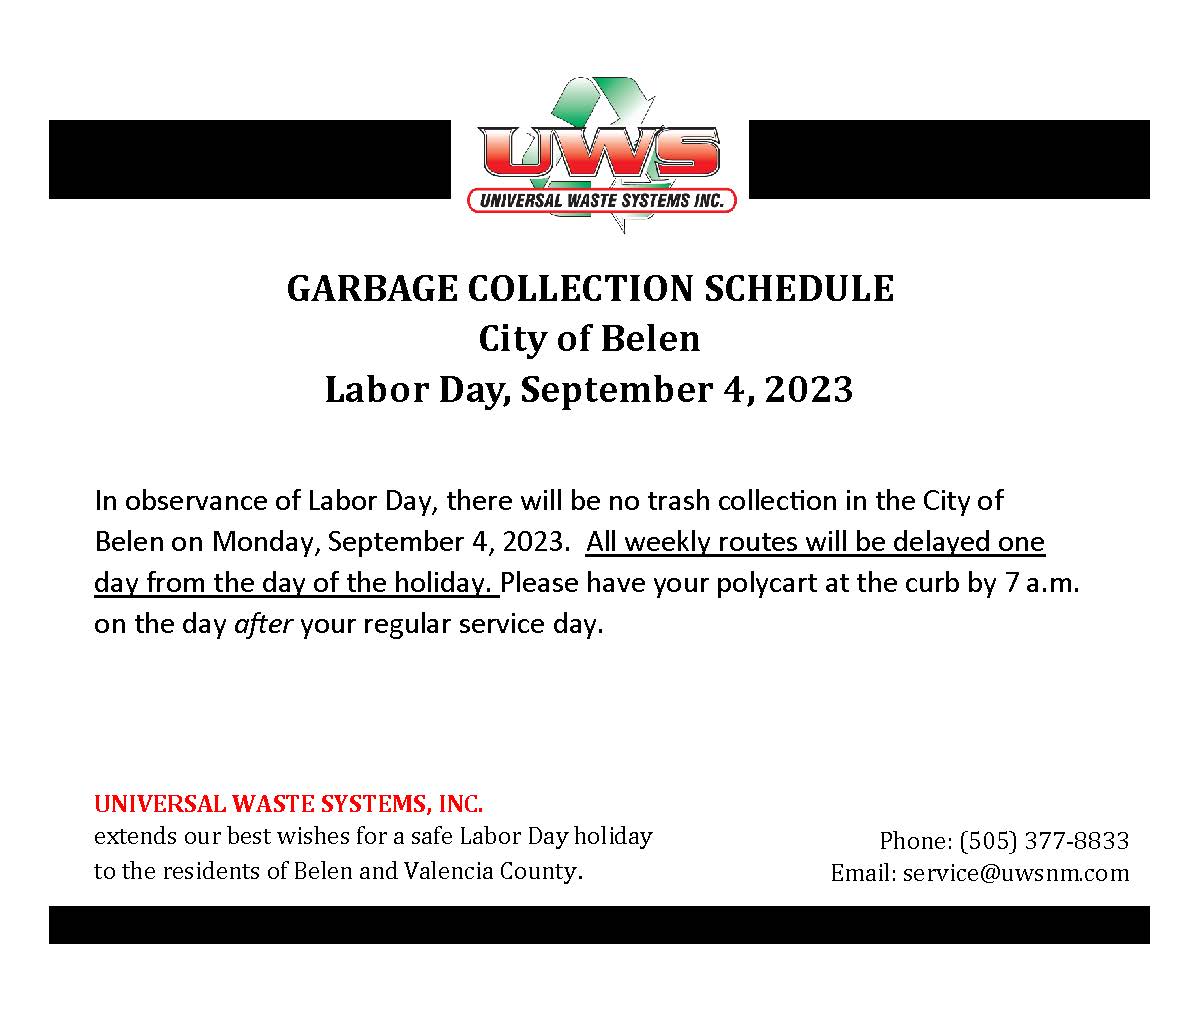 Labor Day Garbage Collection Schedule City of Belen